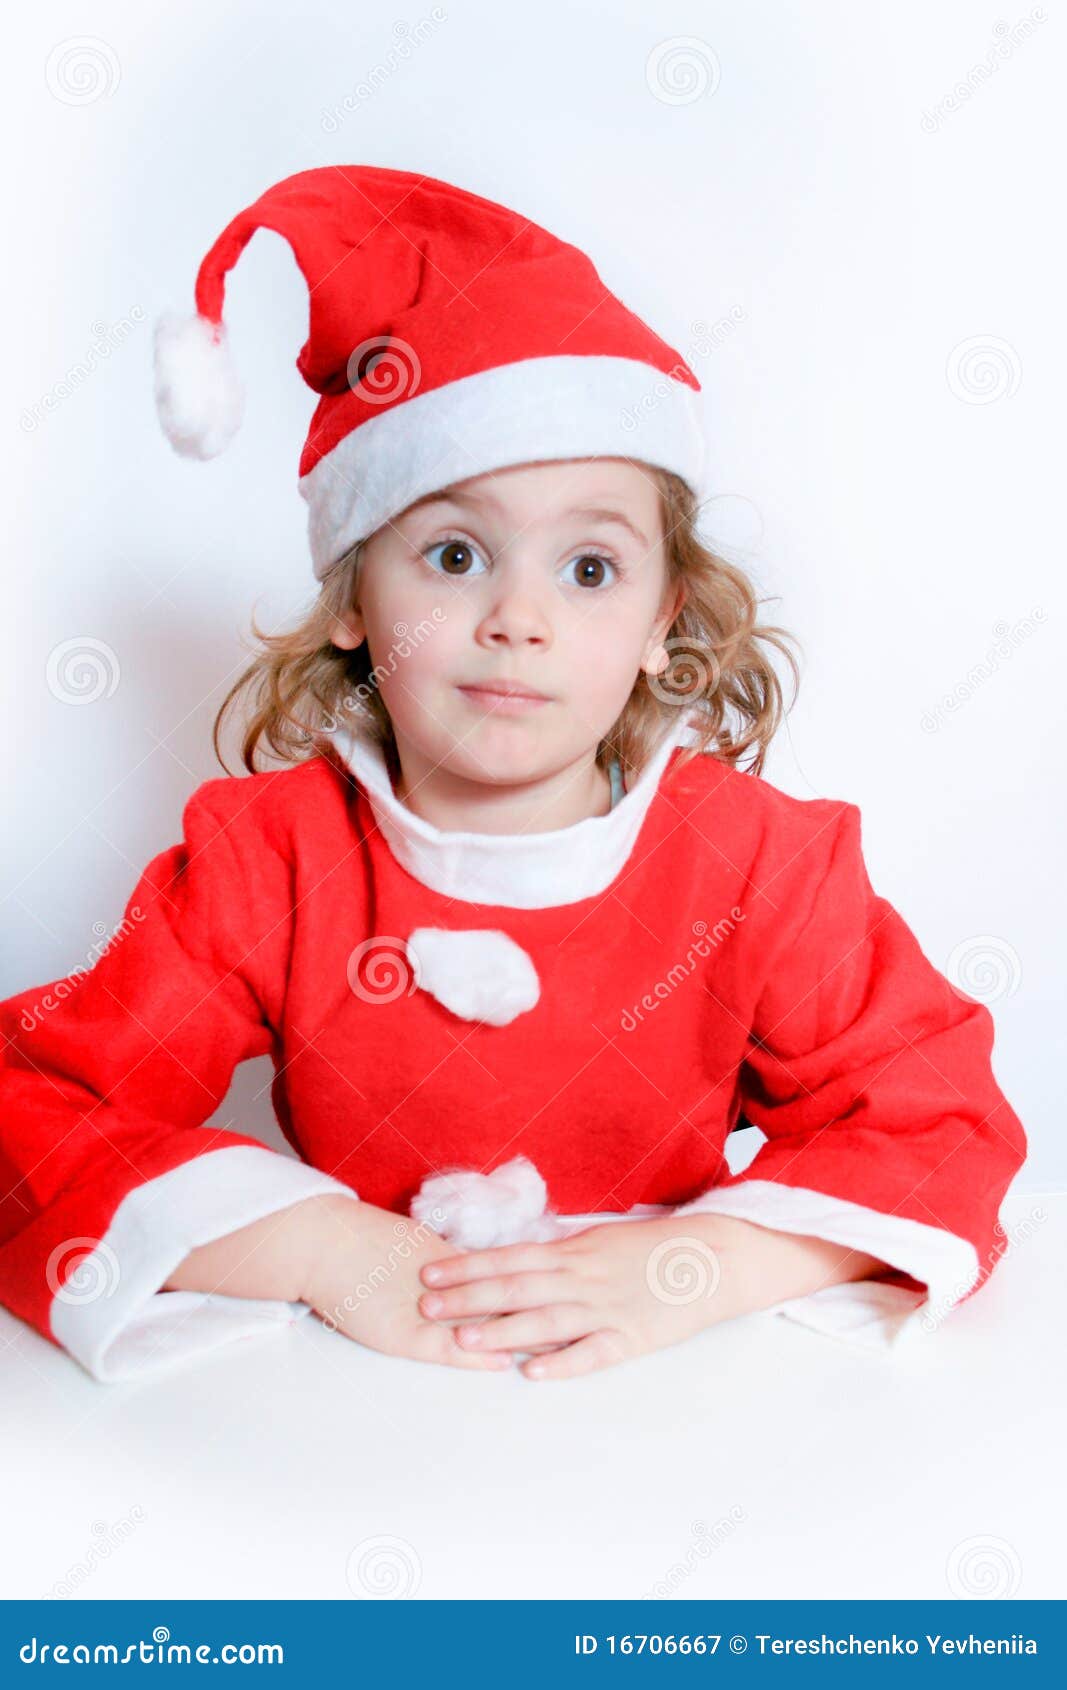 Little Girl In Santa's Hat Royalty Free Stock Photography - Image: 16706667